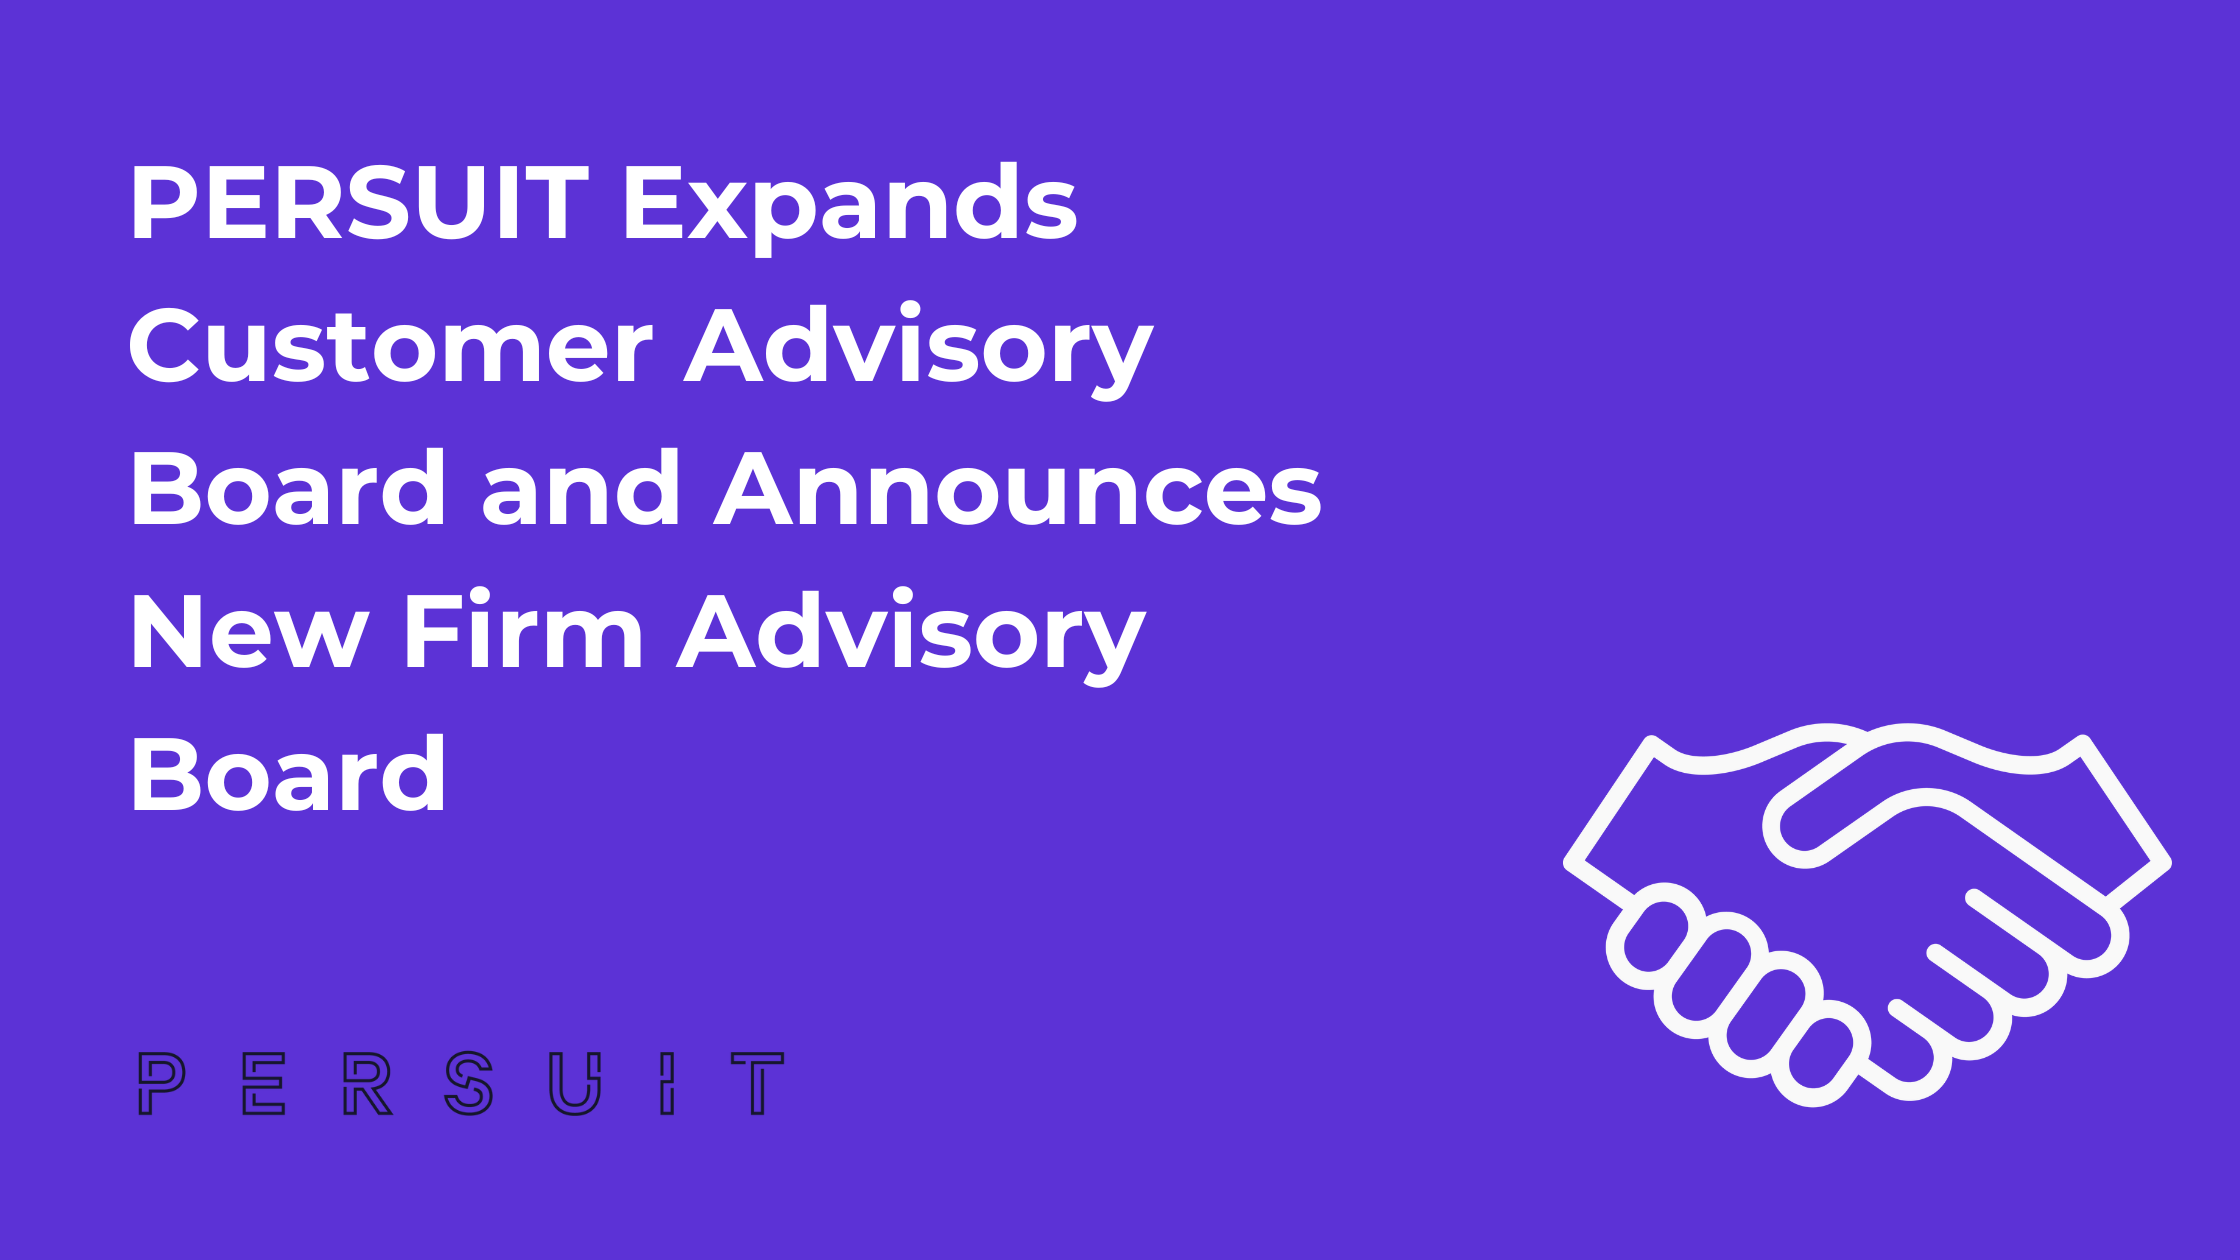 PERSUIT Expands Customer Advisory Board and Announces New Firm Advisory Board